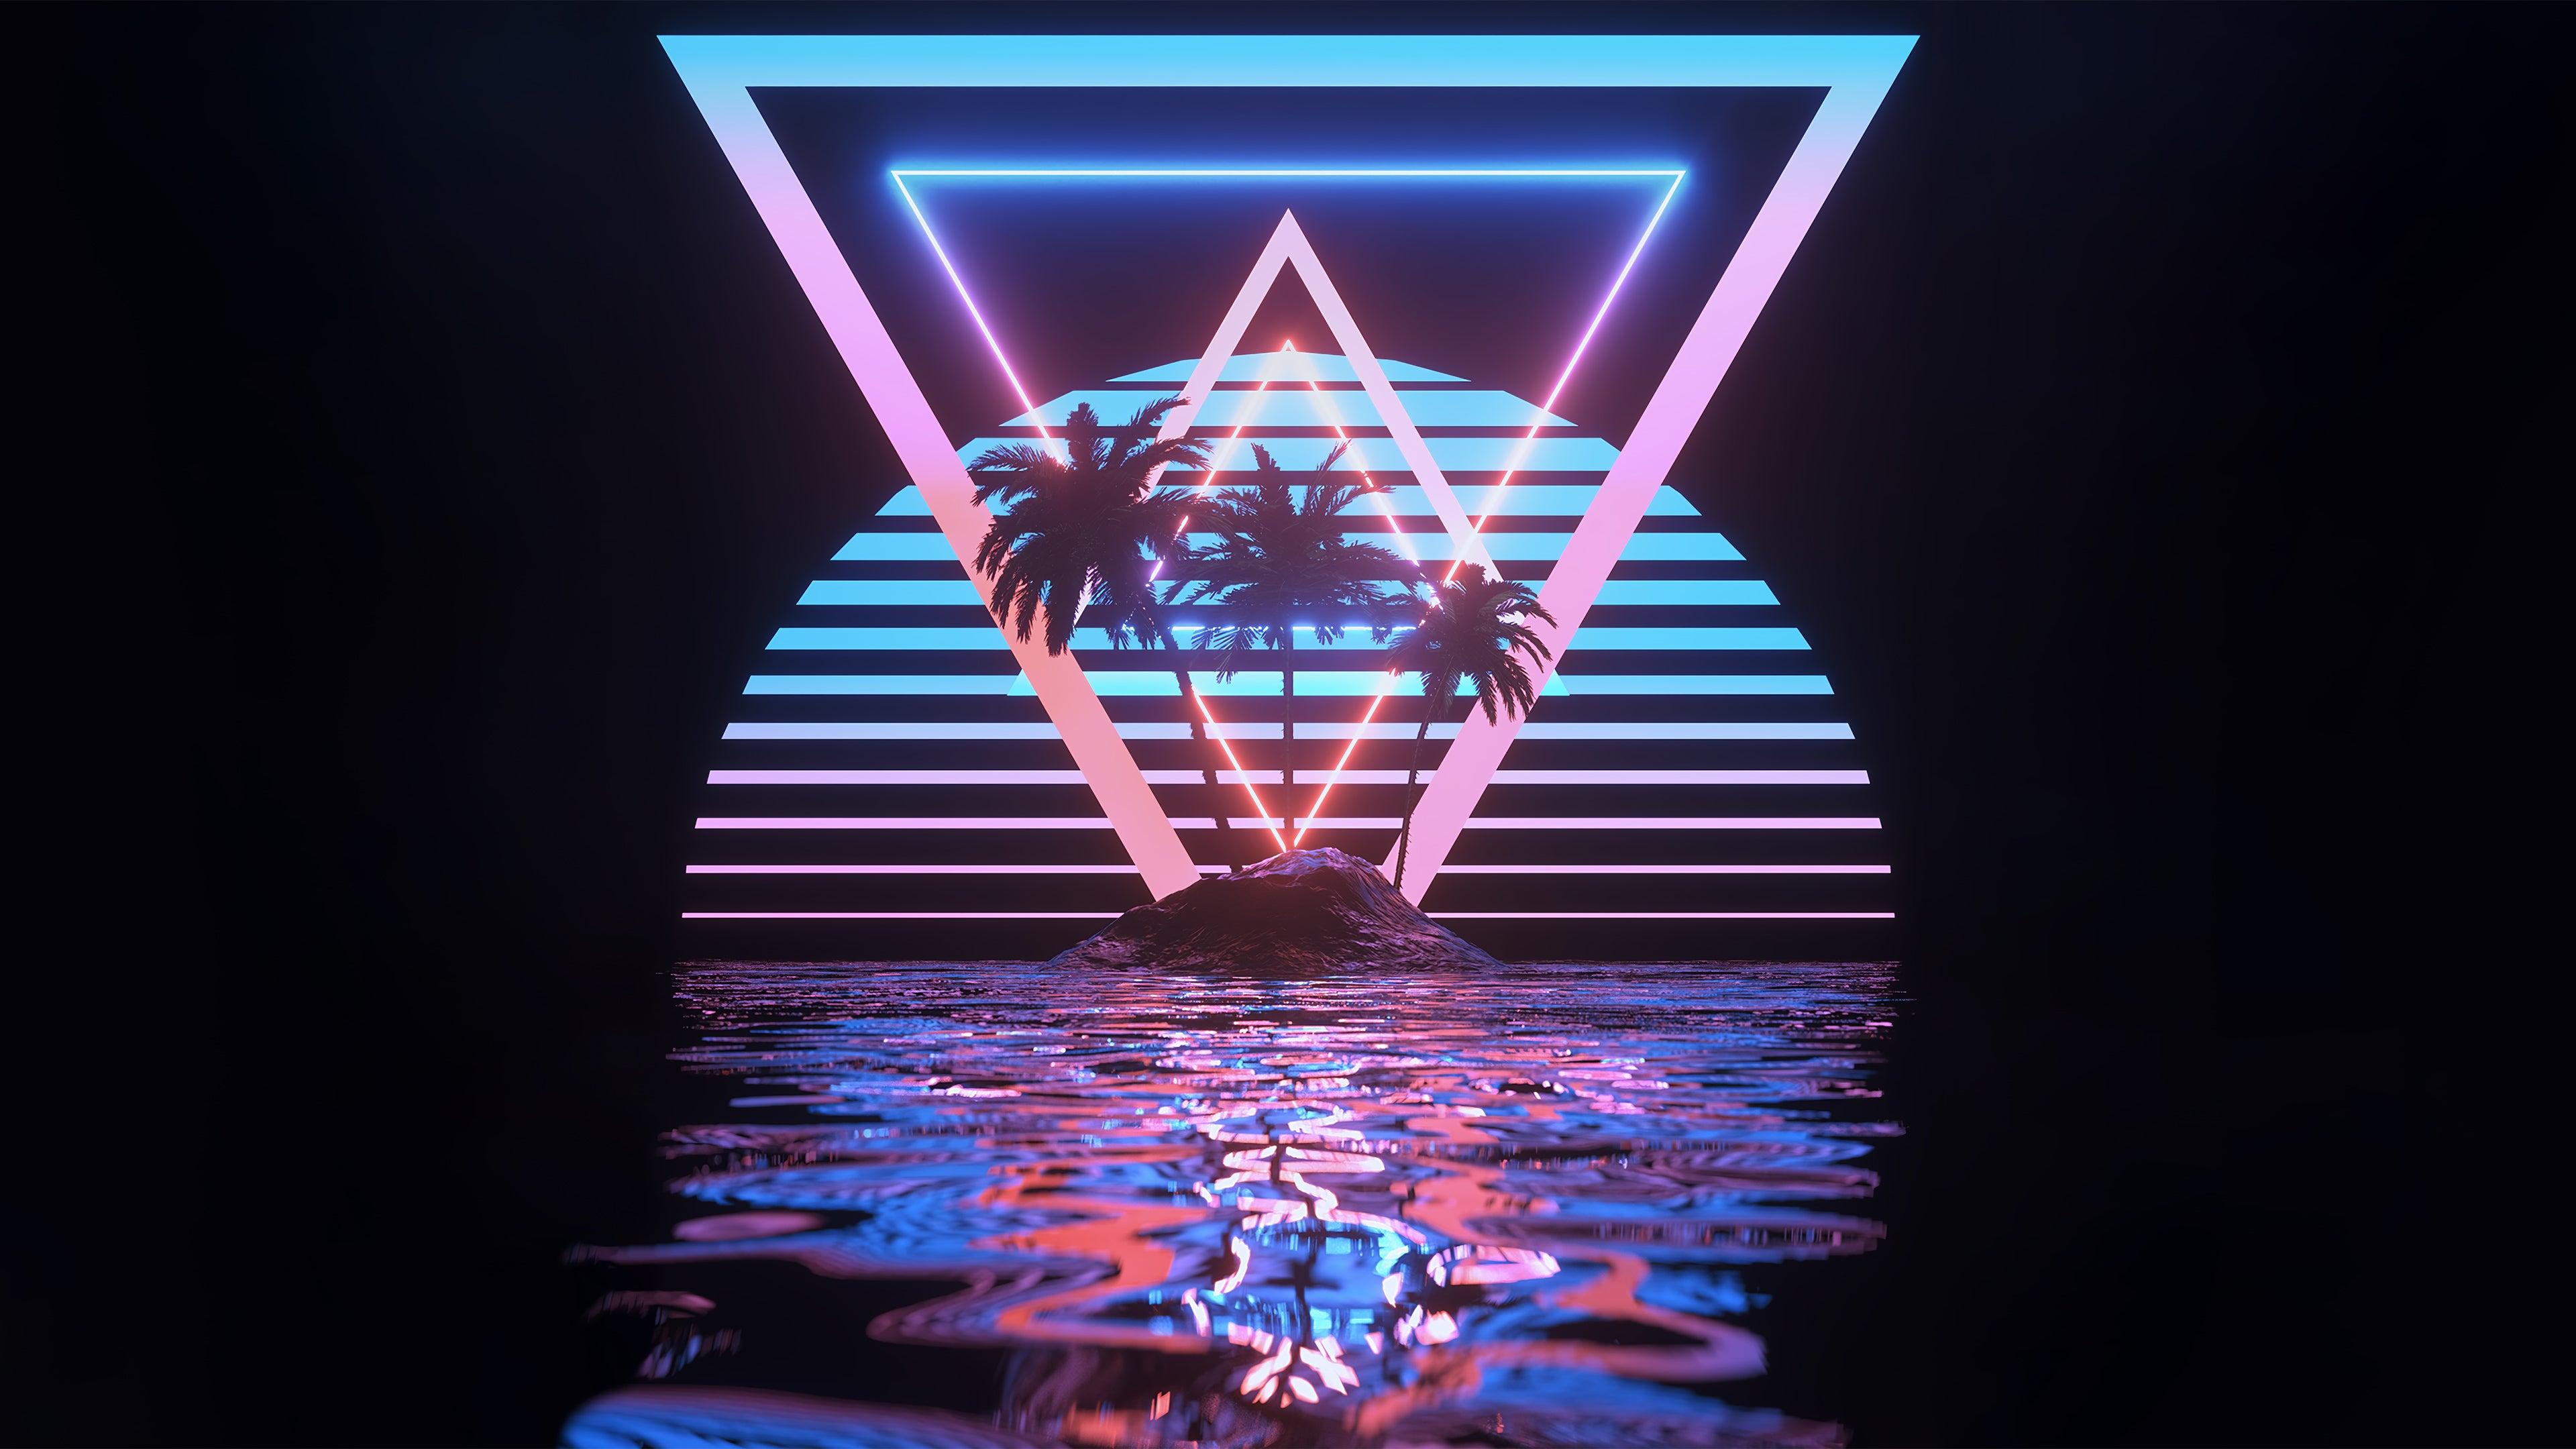 Outrun Ultra Hd Wallpapers - Wallpaper Cave 2AE